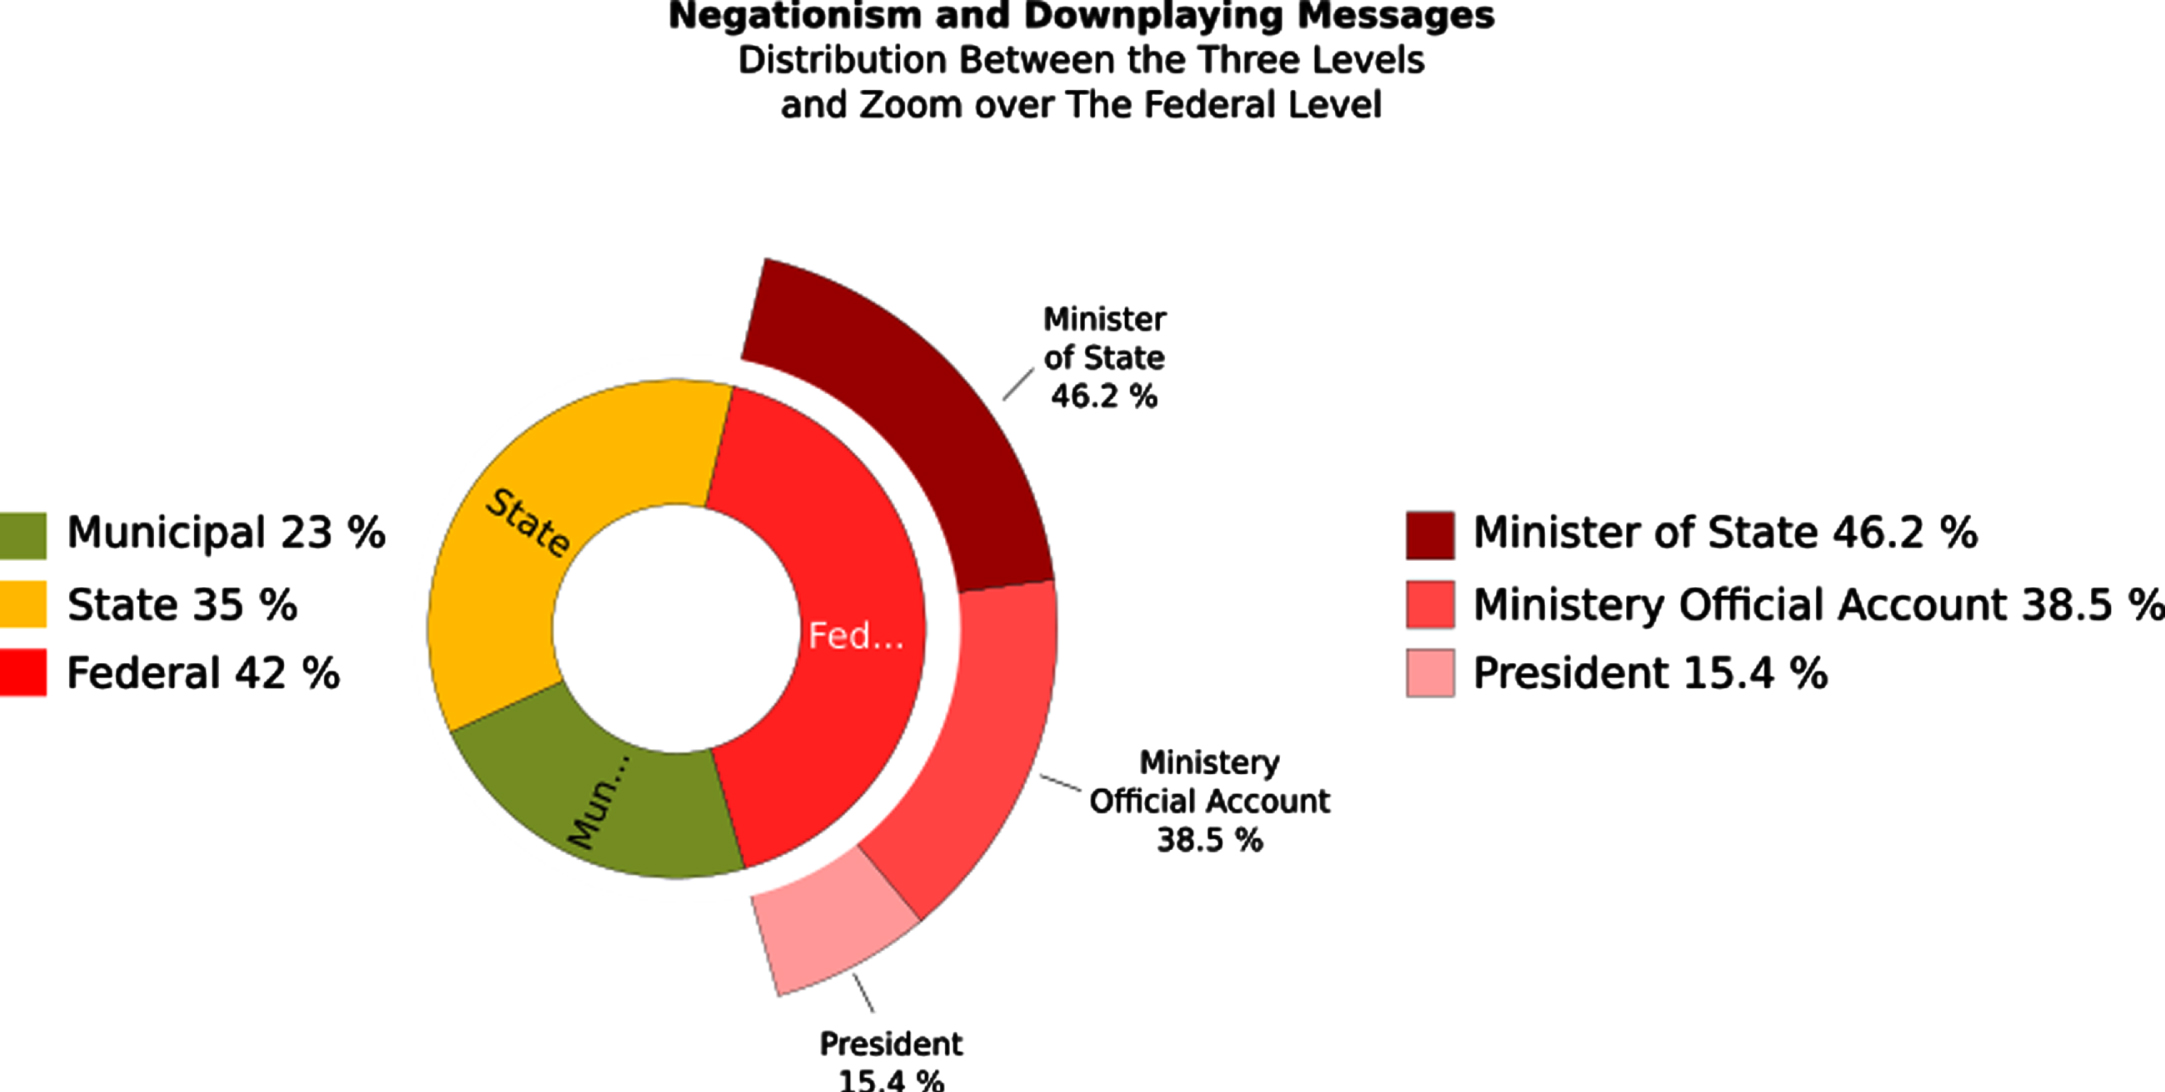 The distribution of scientific negationism and downplaying messages between the three government levels and zoom over the federal level.